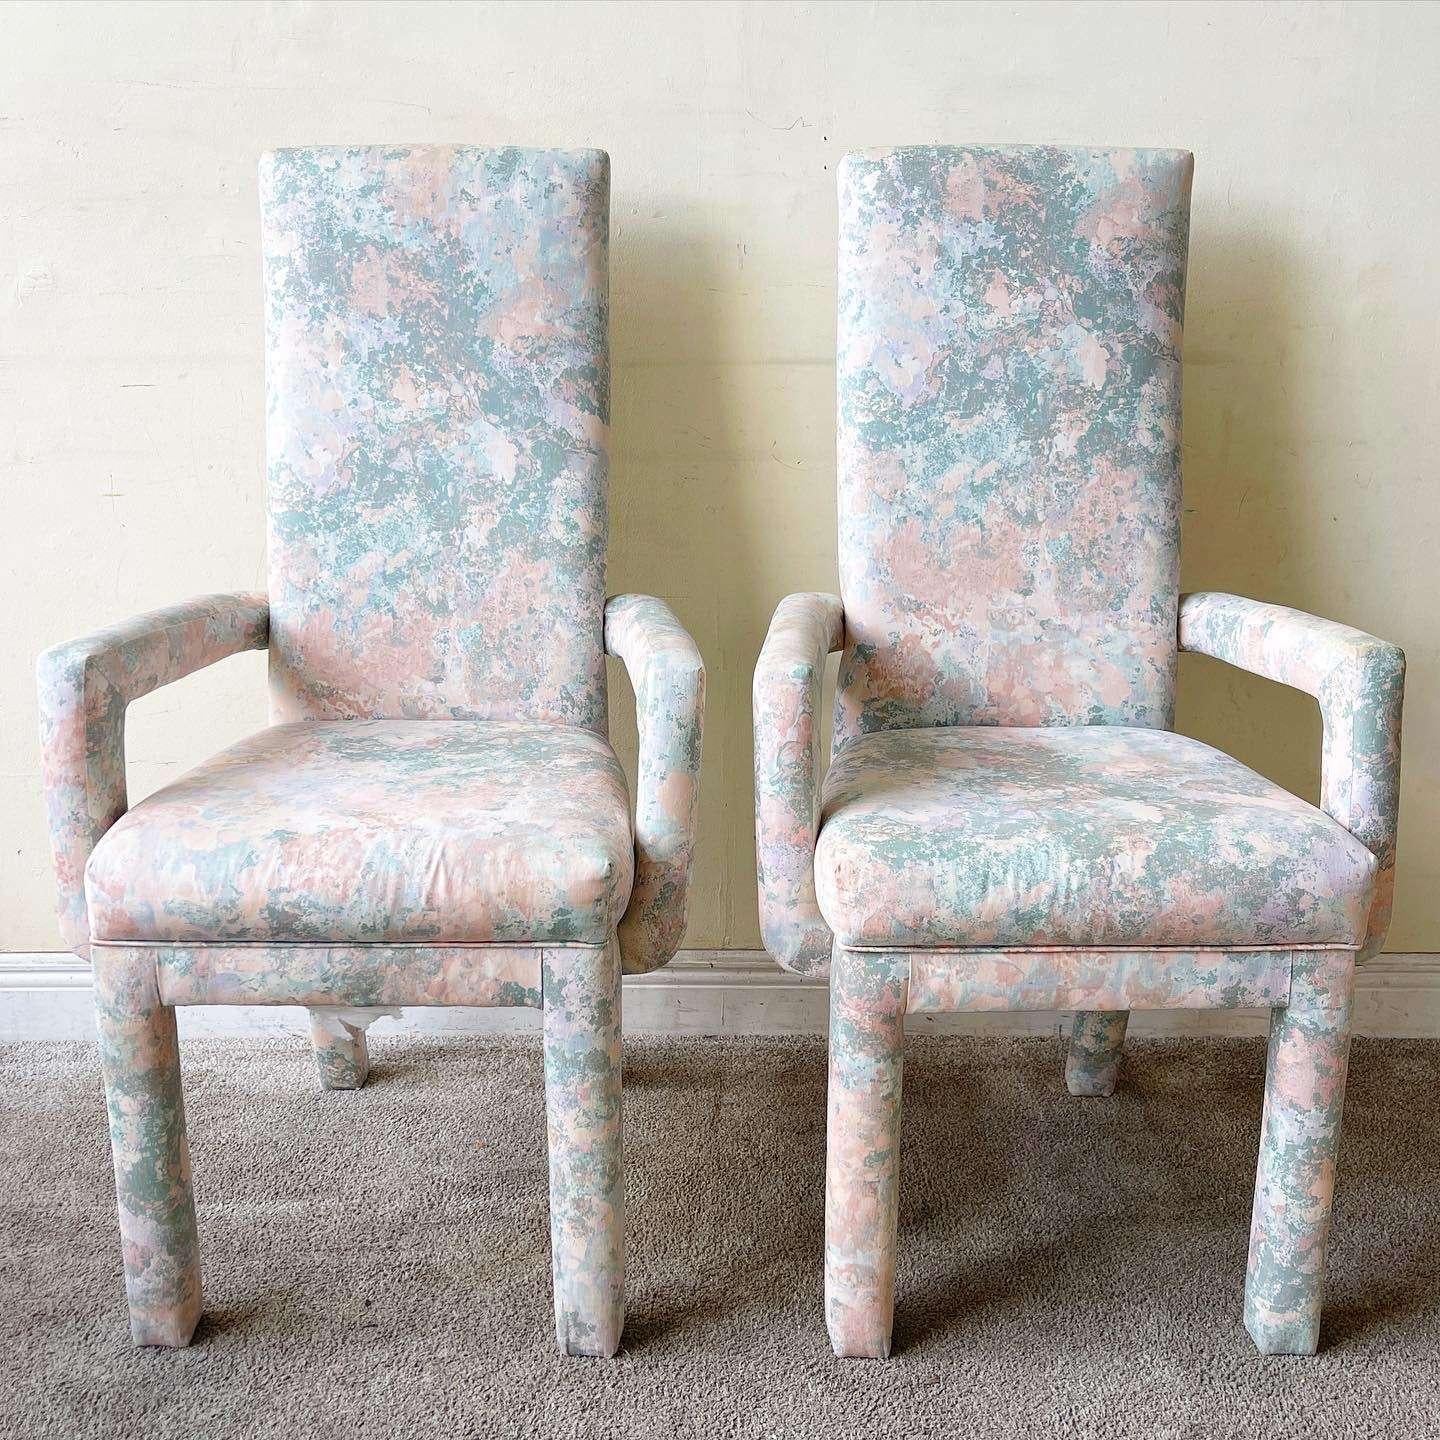 Incredible set of 4 parsons dining chairs. Each feature a pink purple and green designed fabric.

Seat height is 19.0 in.